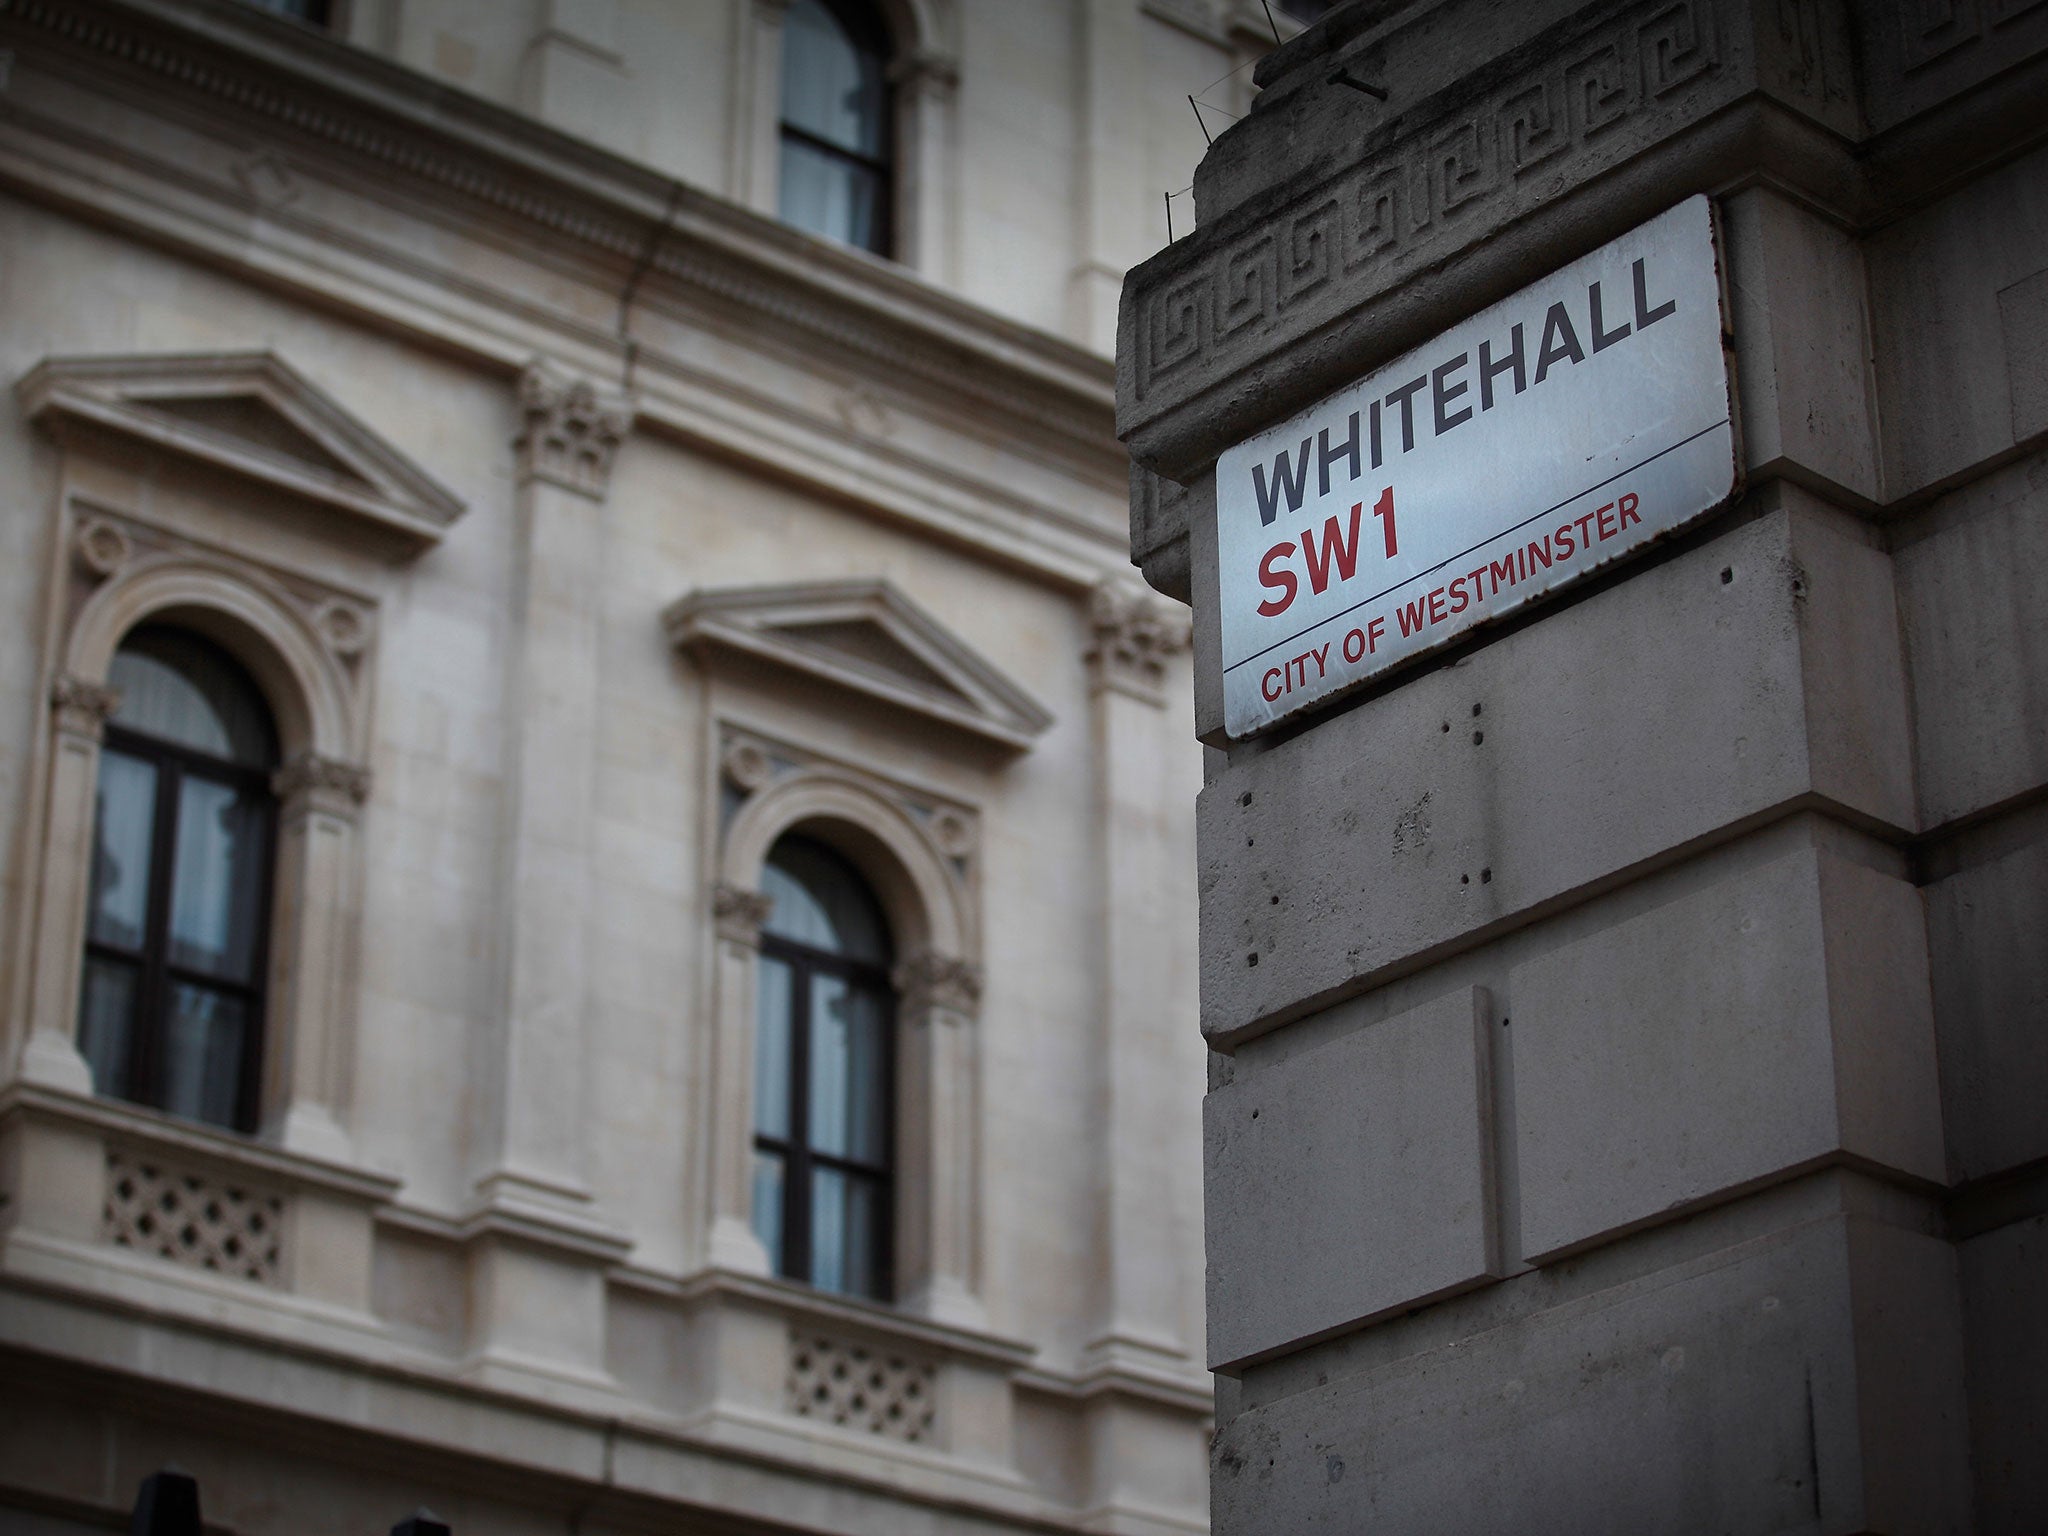 A Whitehall street sign hangs on the corner of Downing Street on July 8, 2010 in London, England. Whitehall is an area of central London, near to Parliament, that is dominated by the great departments of state.